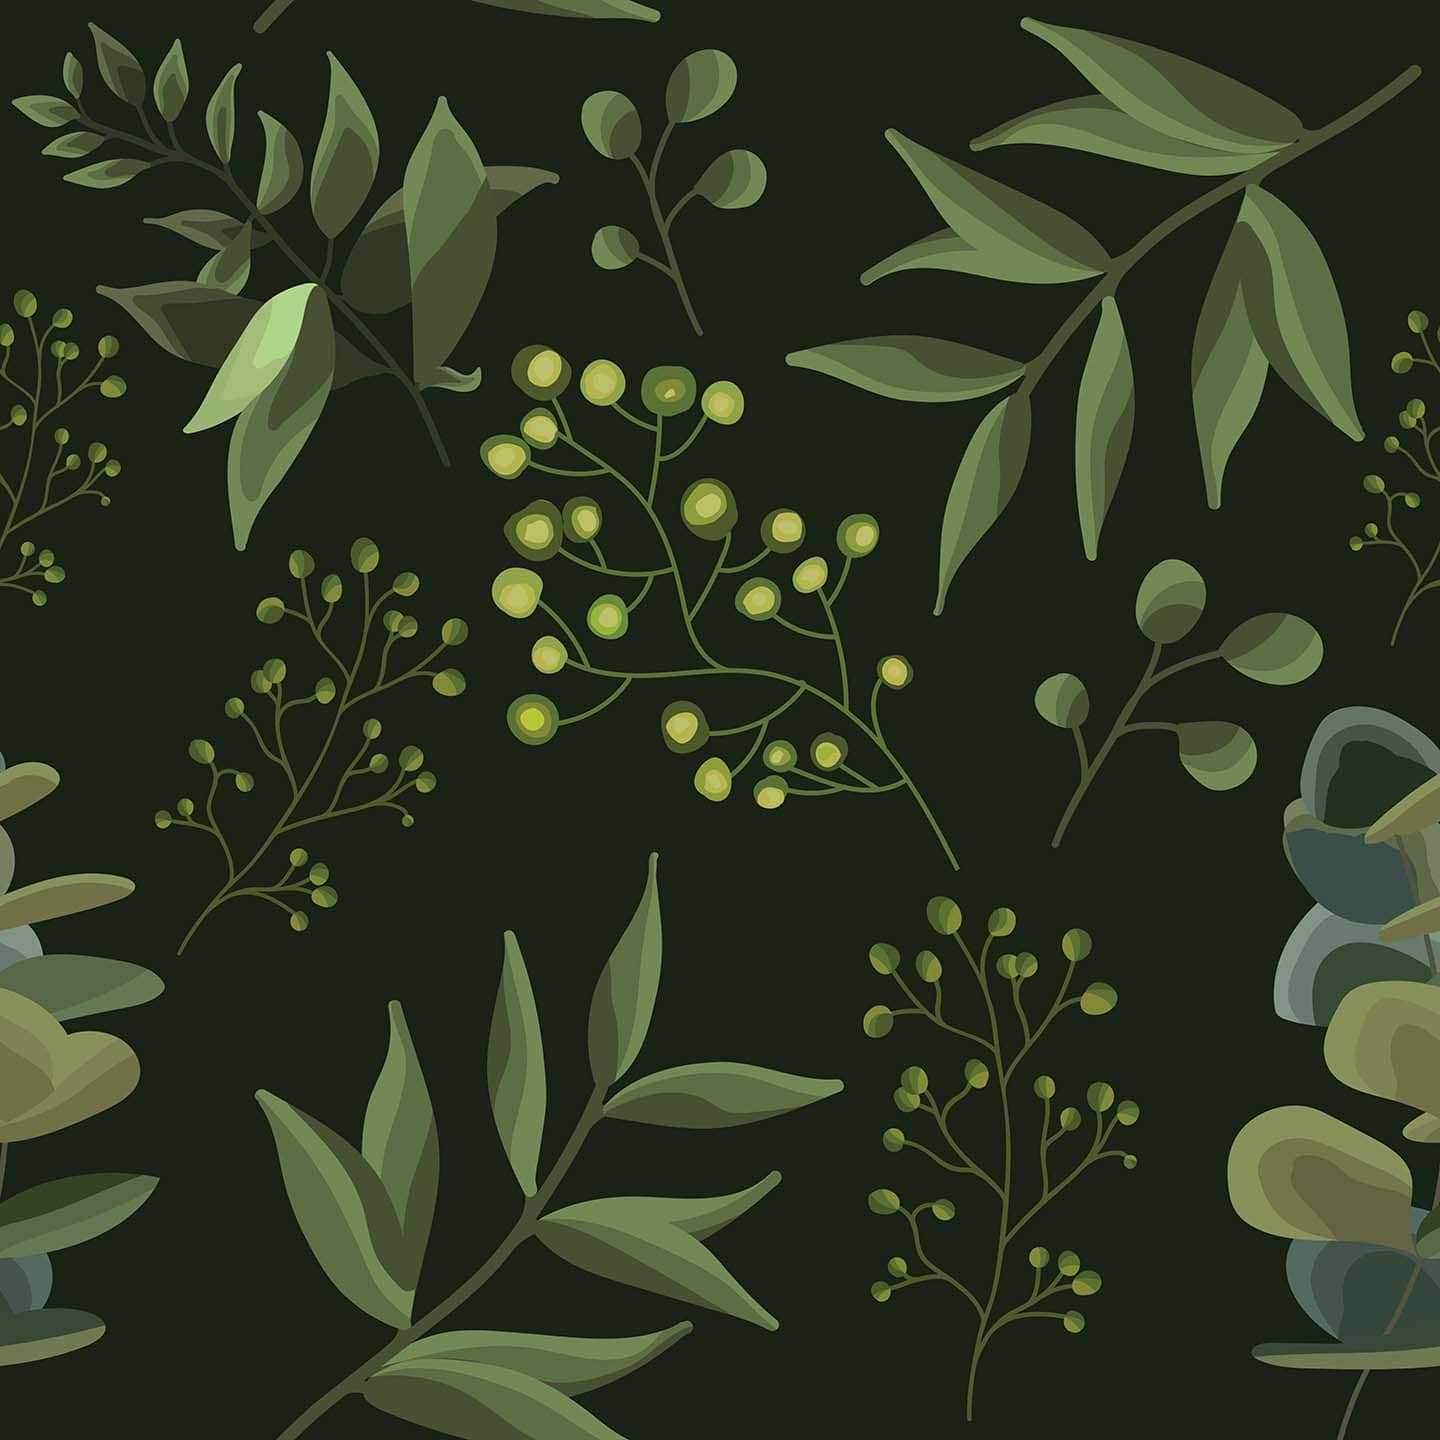 Share more than 60 dark botanical peel and stick wallpaper latest - in